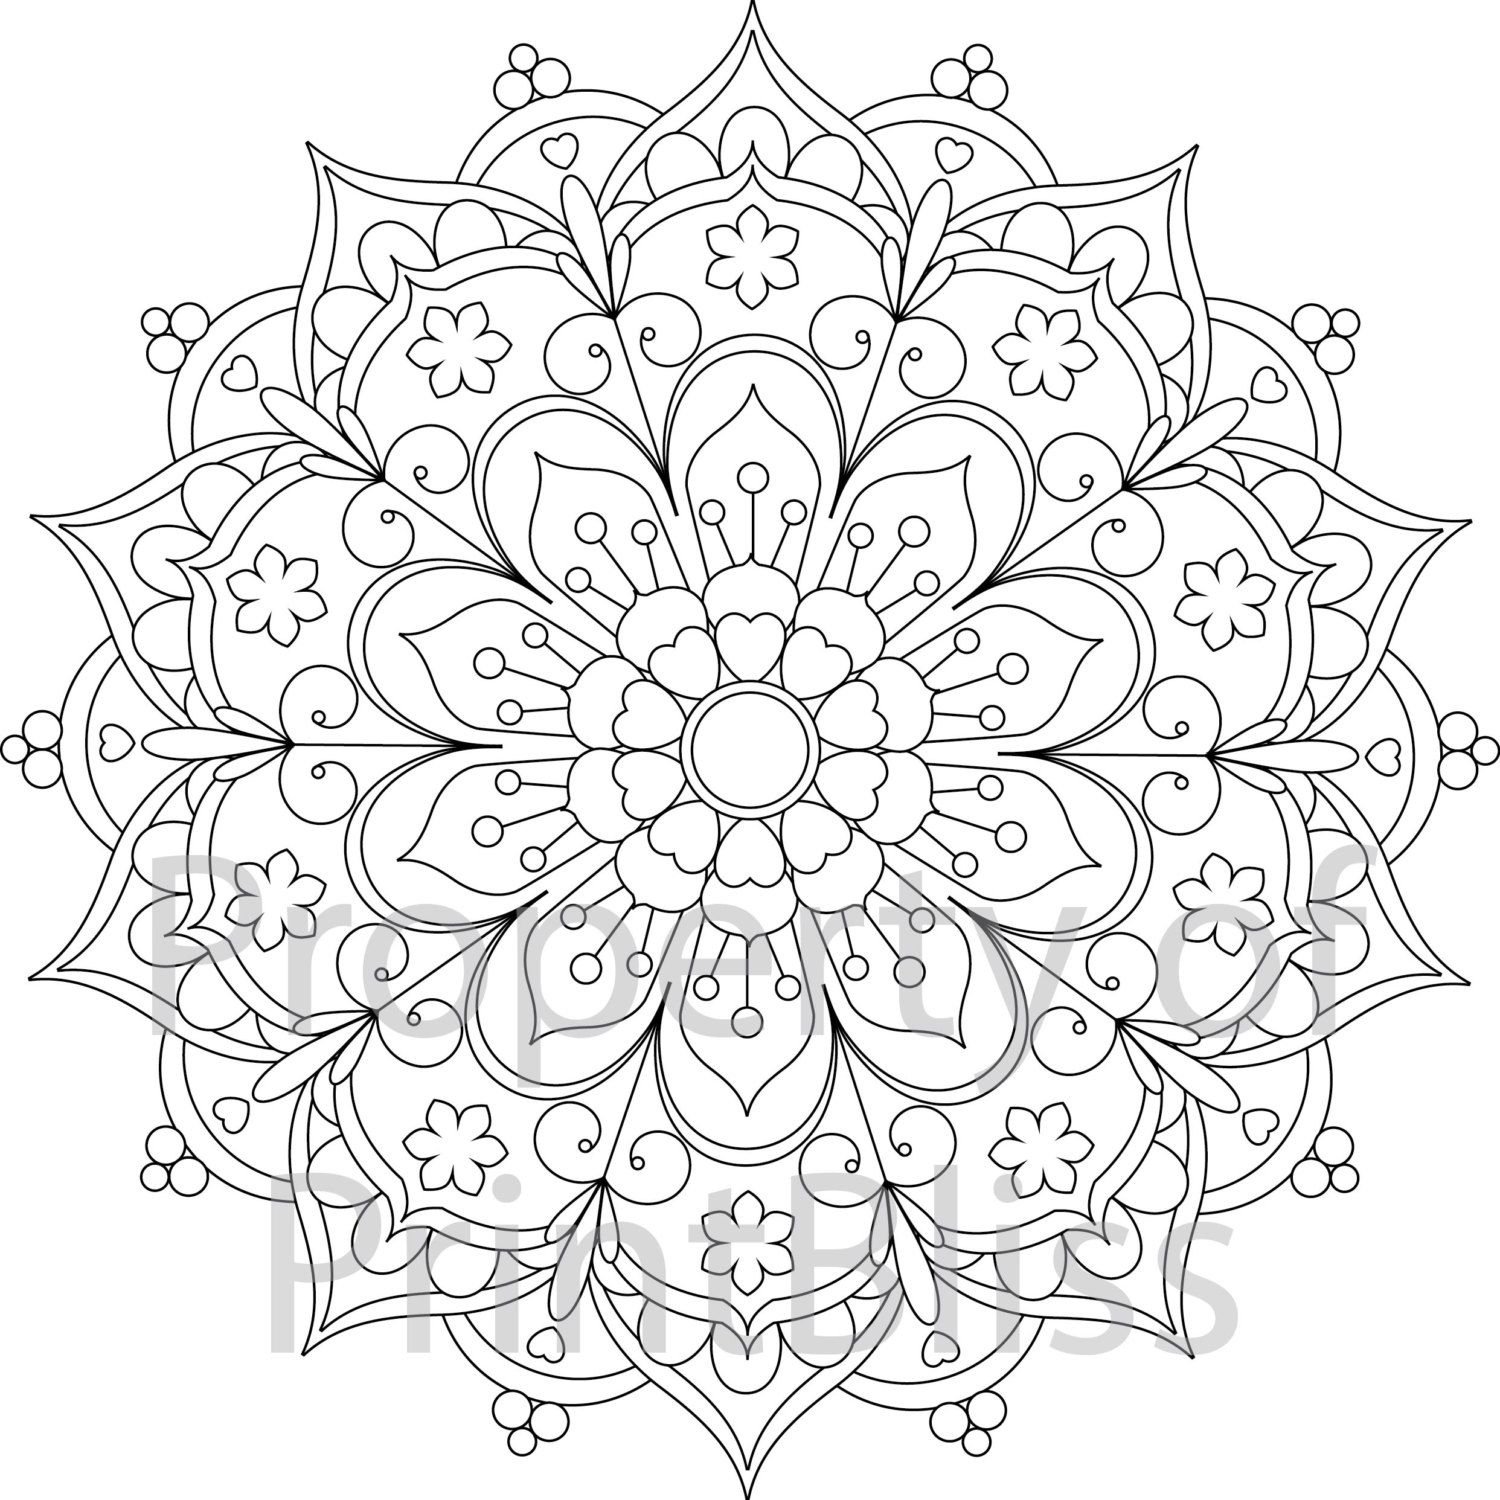 Flower mandala coloring pages printable for free download